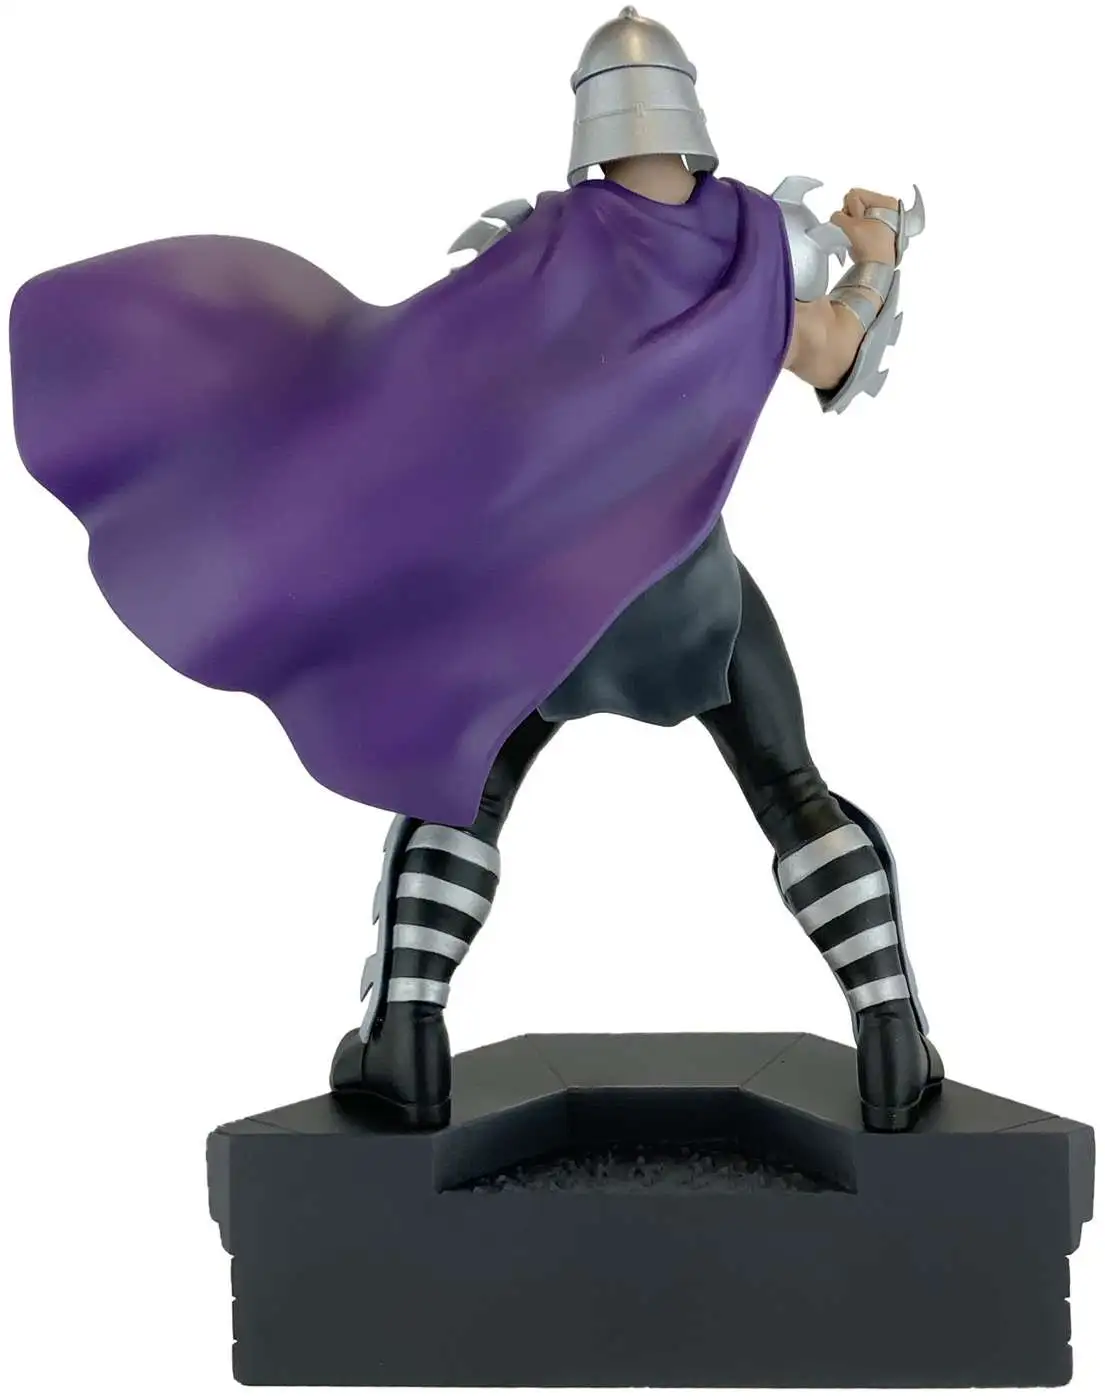 Shredder Statue by PCS Collectibles